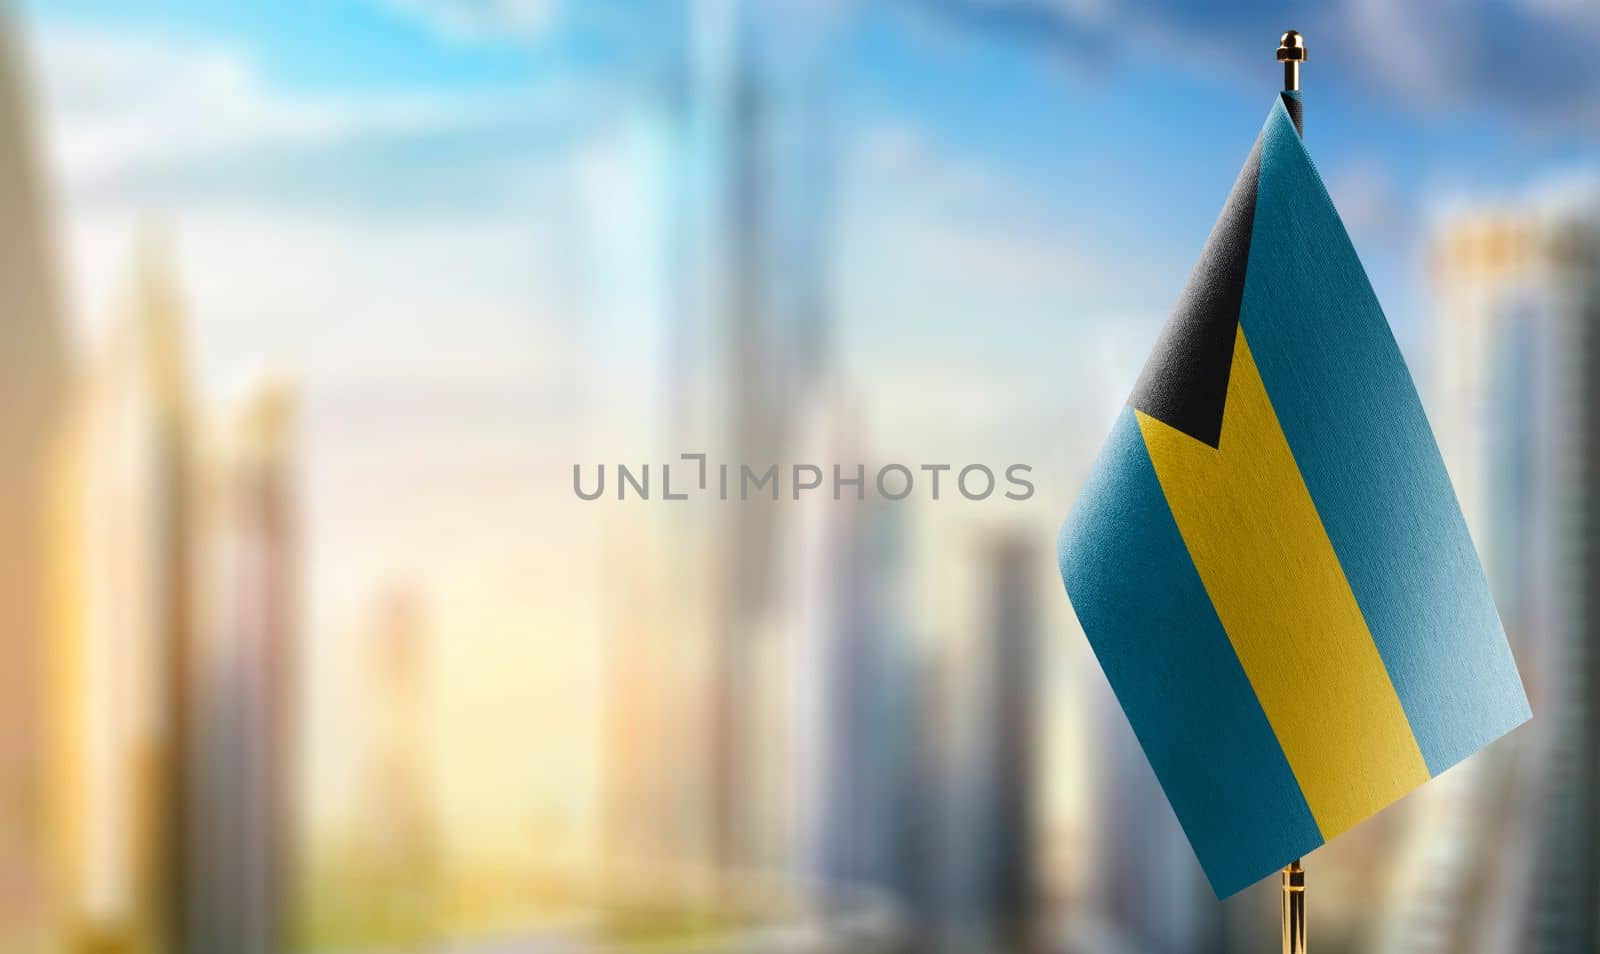 Small flags of the Bahamas on an abstract blurry background by butenkow